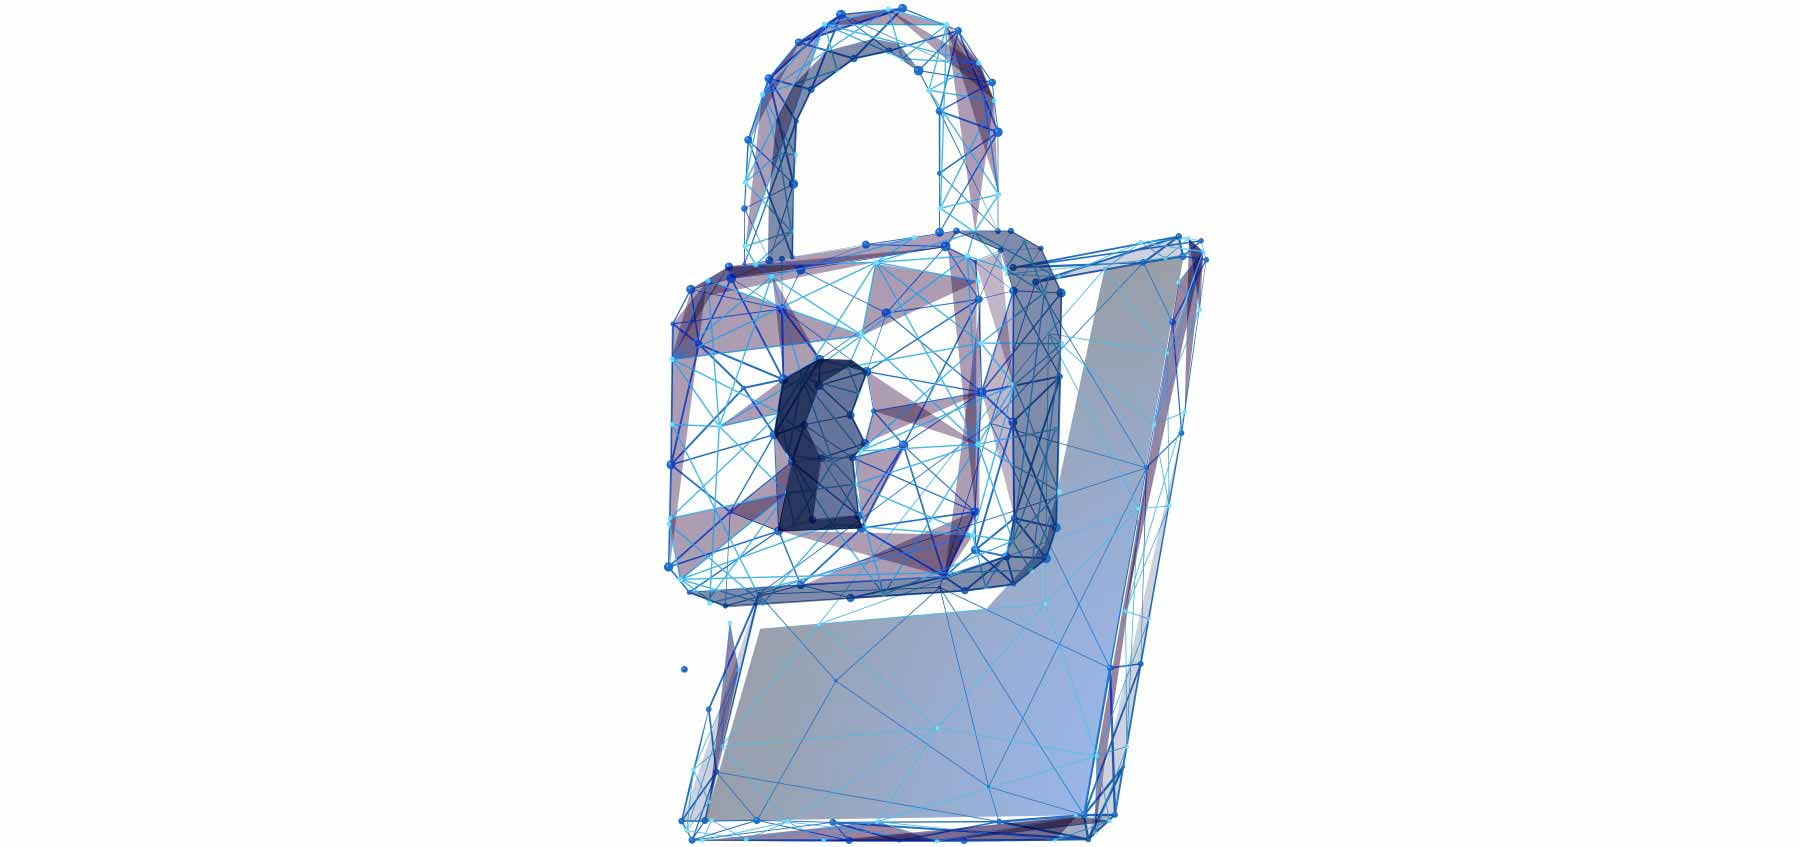 Padlock and Tablet device